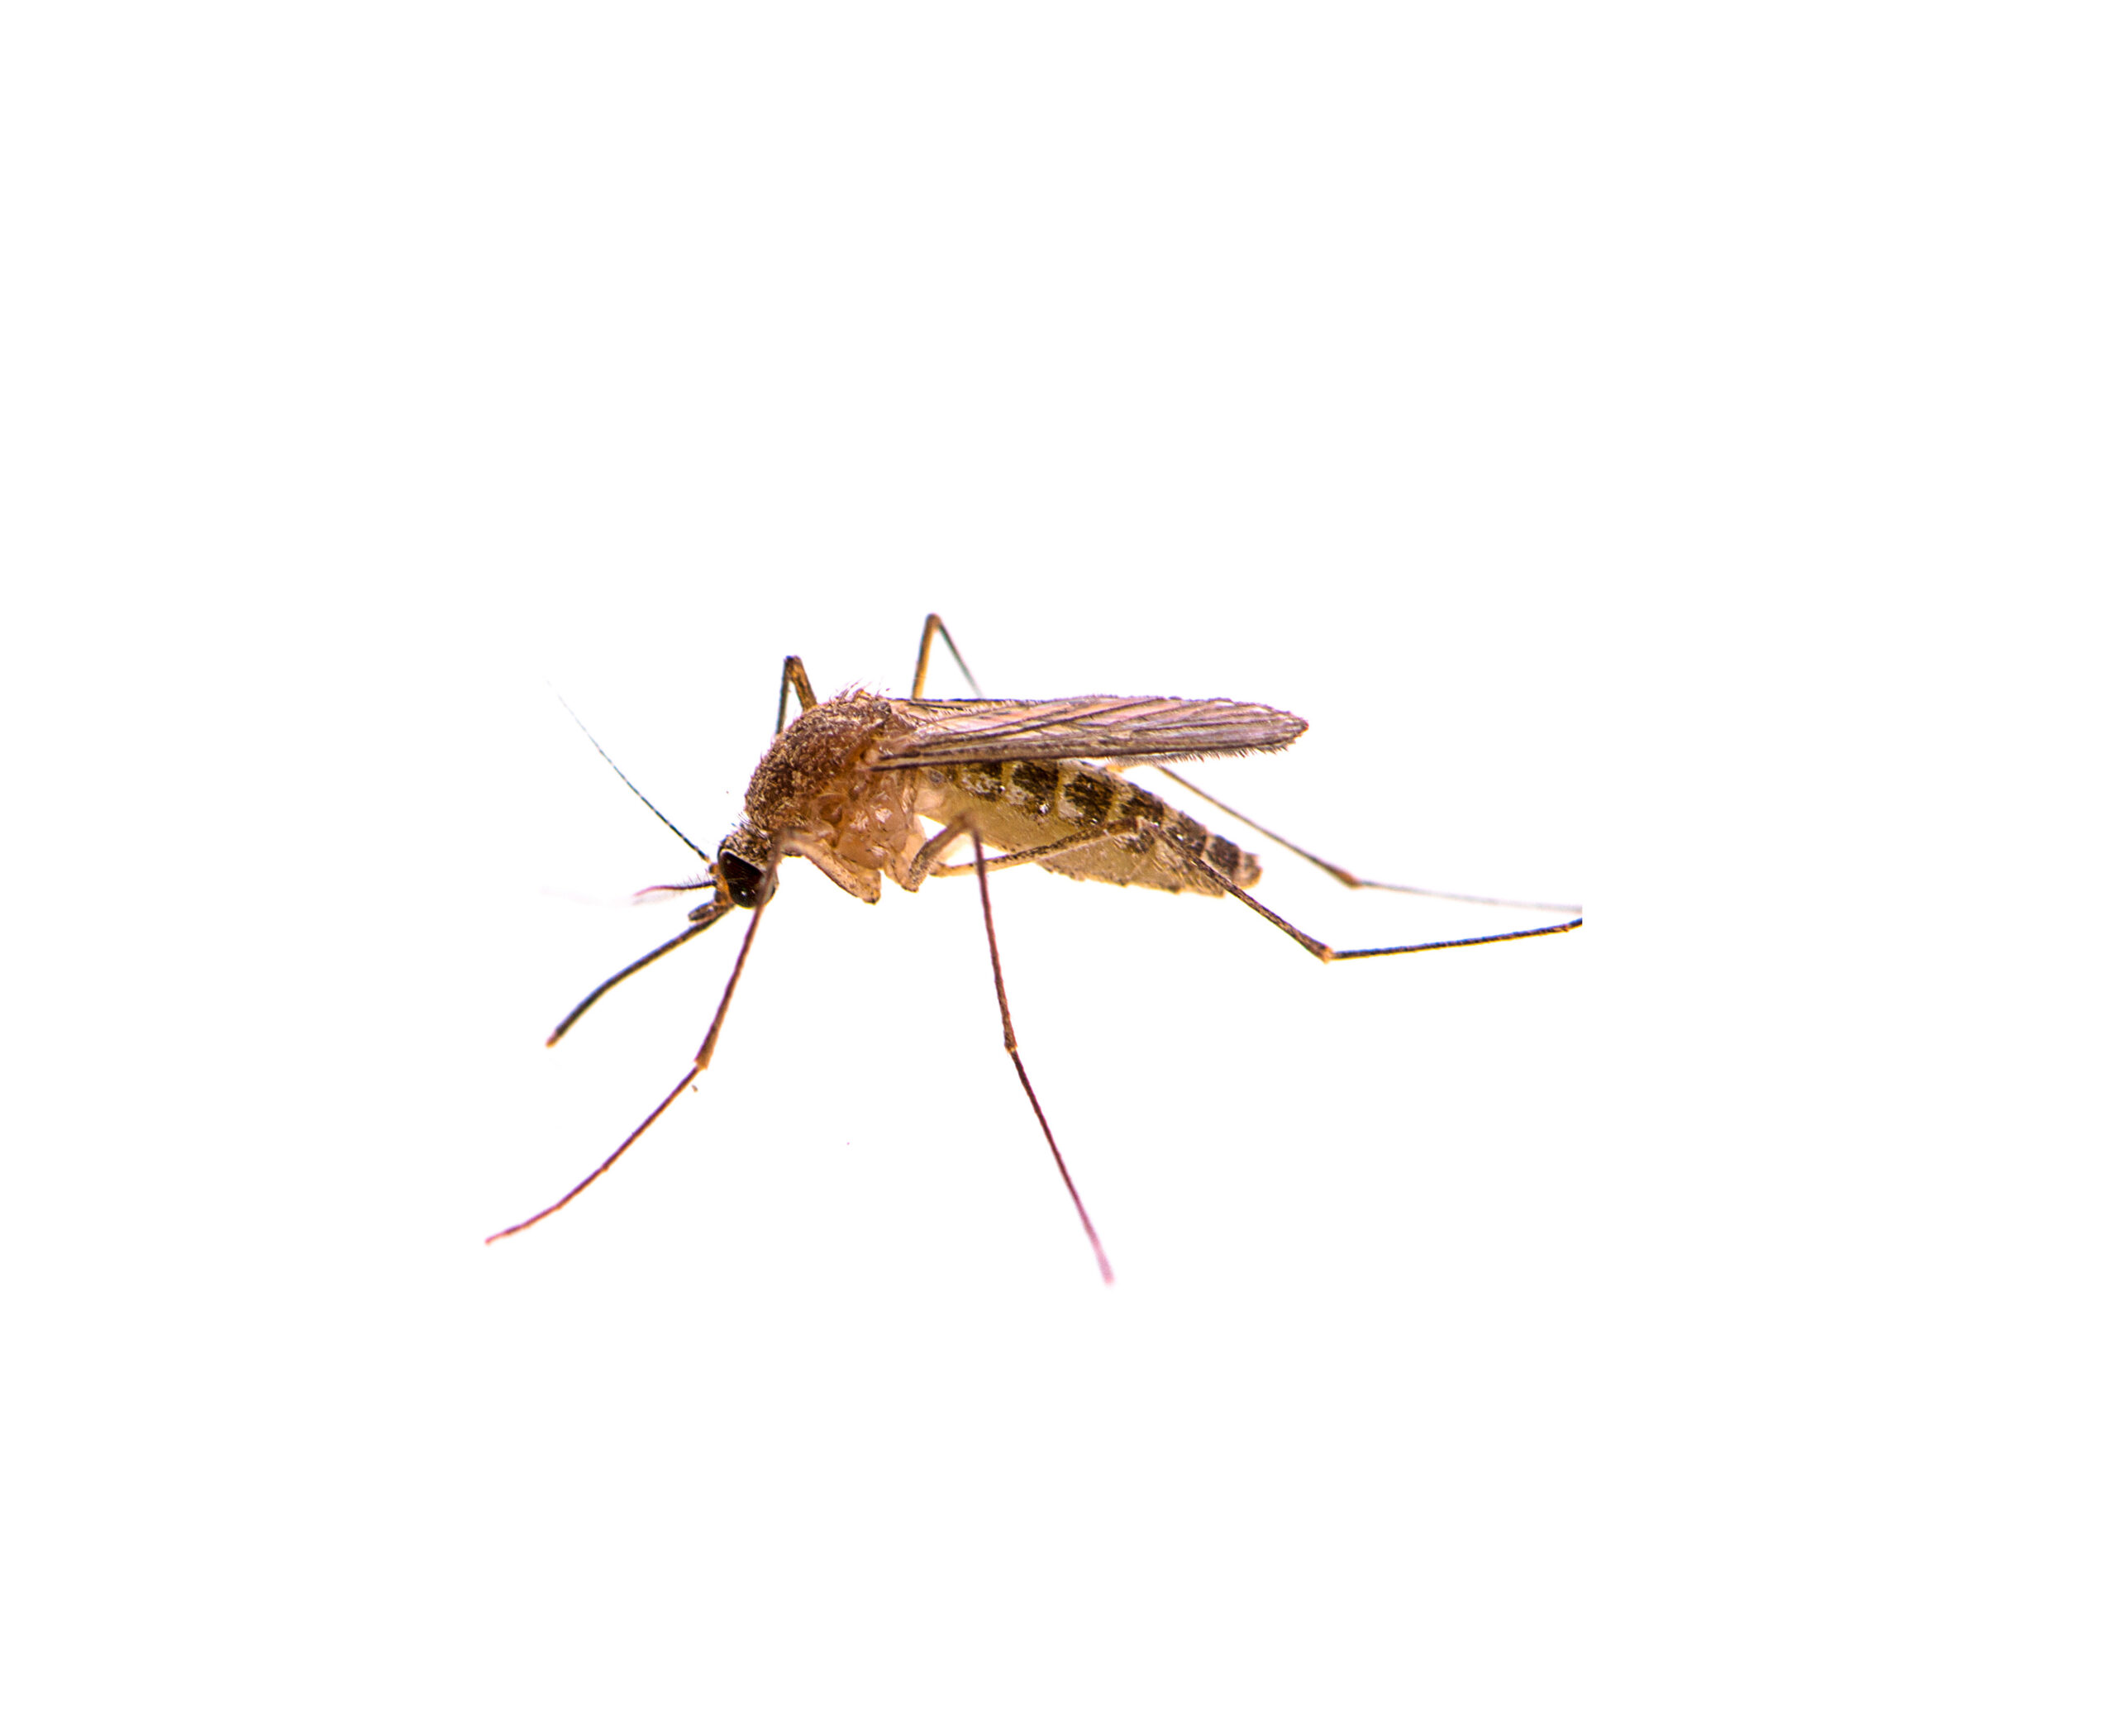 Close up of a mosquito on a white background